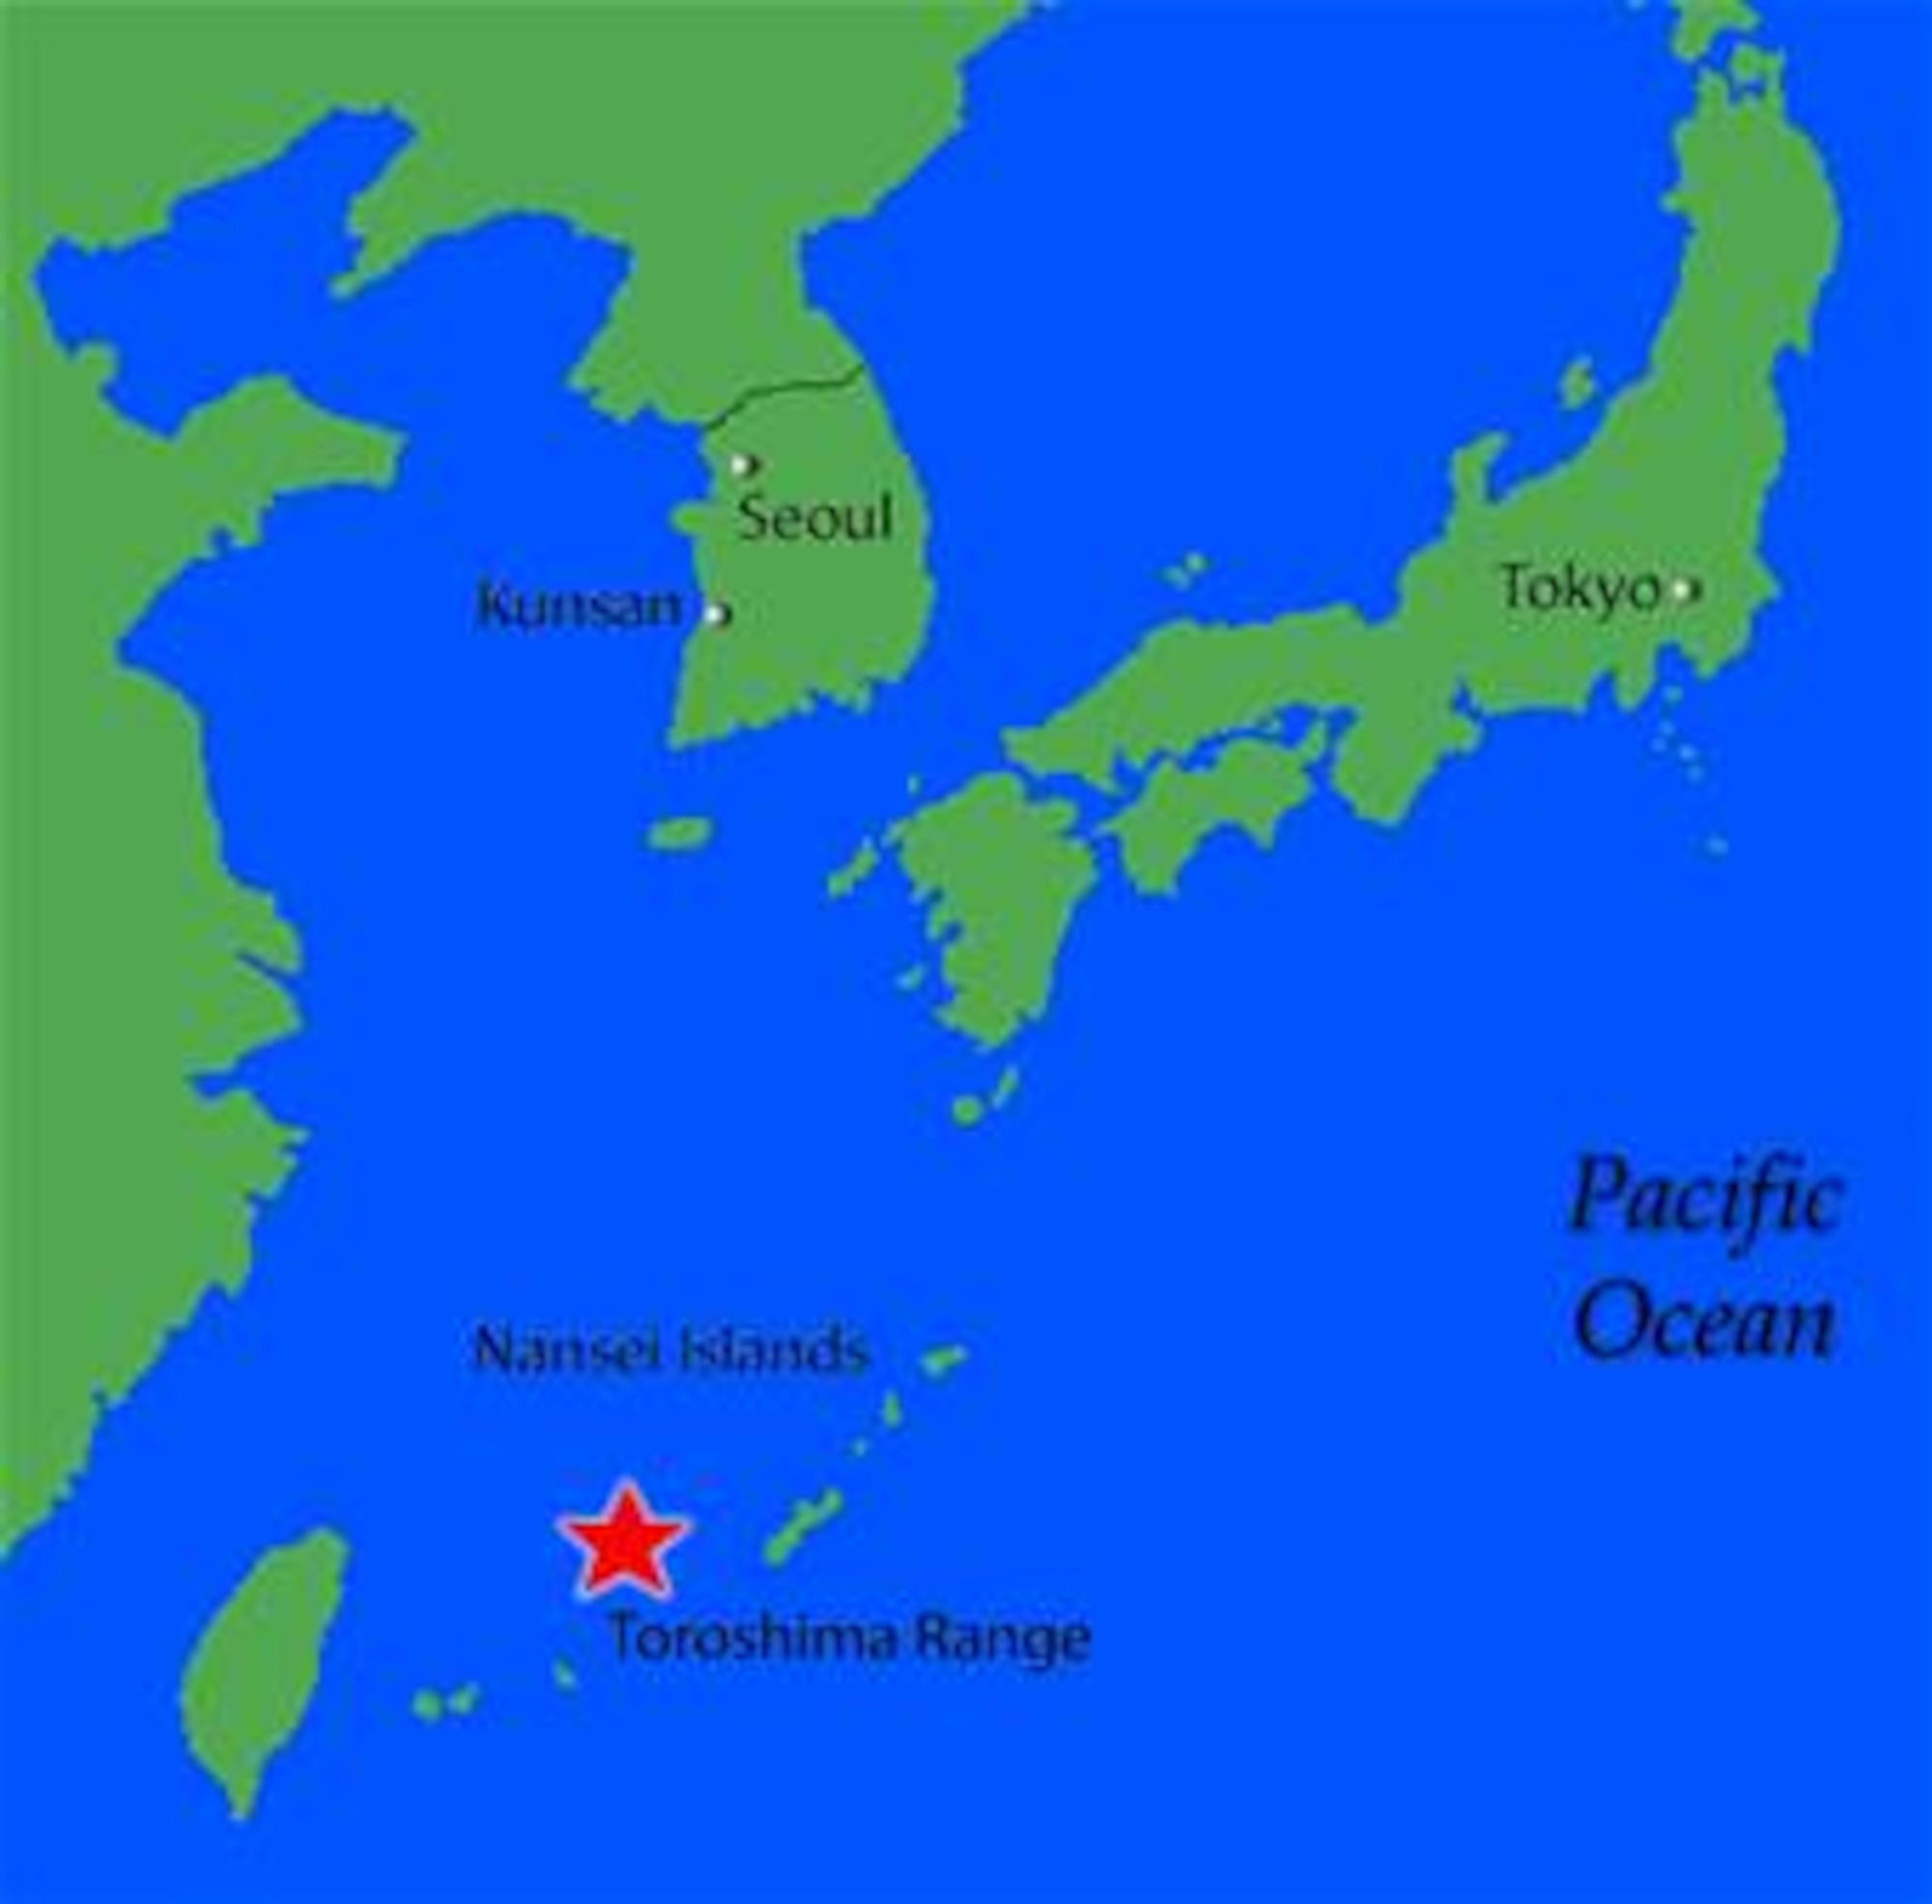 Toroshima Range, located approximately 650 miles south of Kunsan Air Base, Republic of Korea, is a small, uninhabited island owned by the Japanese government. The bombing range can accomodate an assortment of 8th Fighter Wing "Wolf Pack" weaponry, including a variety of guided bomb units, air-to-ground missiles and traditional iron bombs. (U.S. Air Force graphic/Senior Airman Stephen Collier)